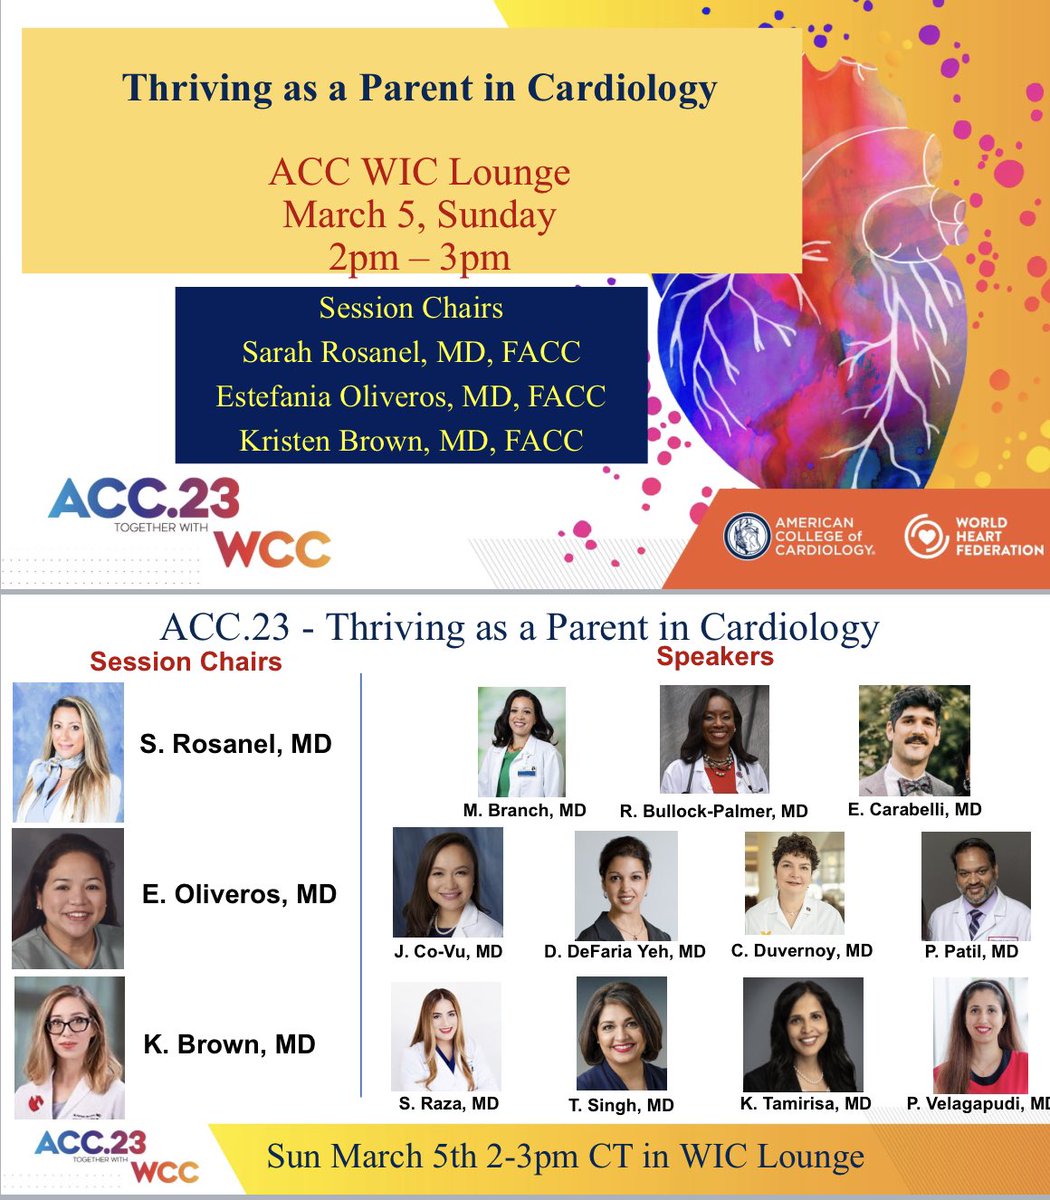 New orleans here we come! #ACC23 #WCCardio #ACCWIC looking forward for this session at ACC WIC lounge! @CarabelliEvan @pravinp8 @ddefariayeh @ACCinTouch @FloridaACC @ditchhaporia @EdwardFryMD @MinnowWalsh #ACCCardioOB #ACCEP #ACCPrev